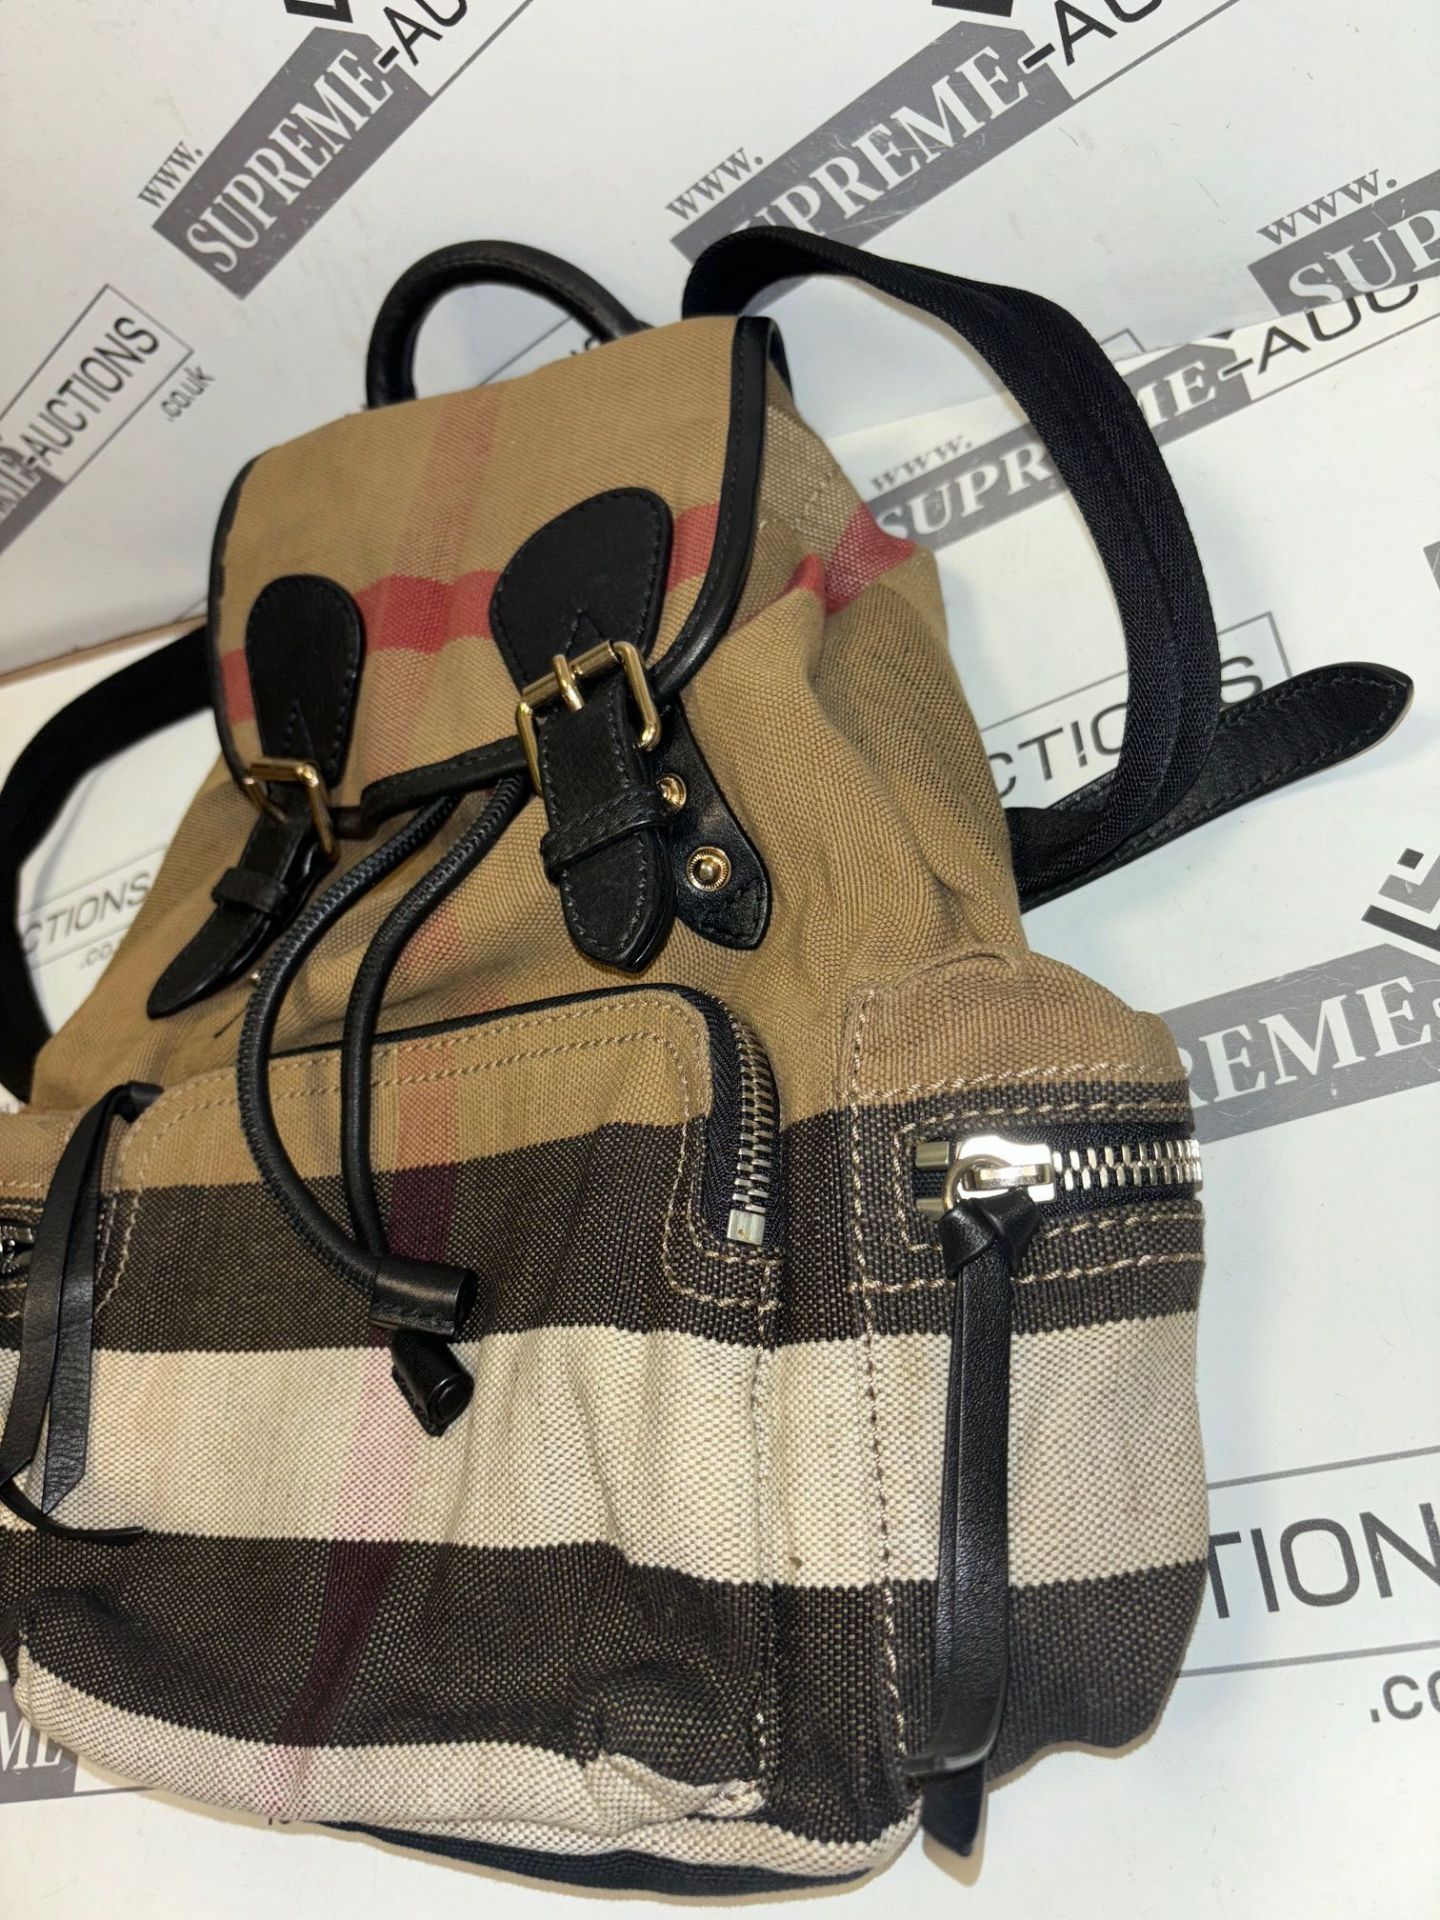 Genuine Burberry Canvas Backpack. RRP £895.00. WITH TAGS 100D/30 - Image 4 of 12